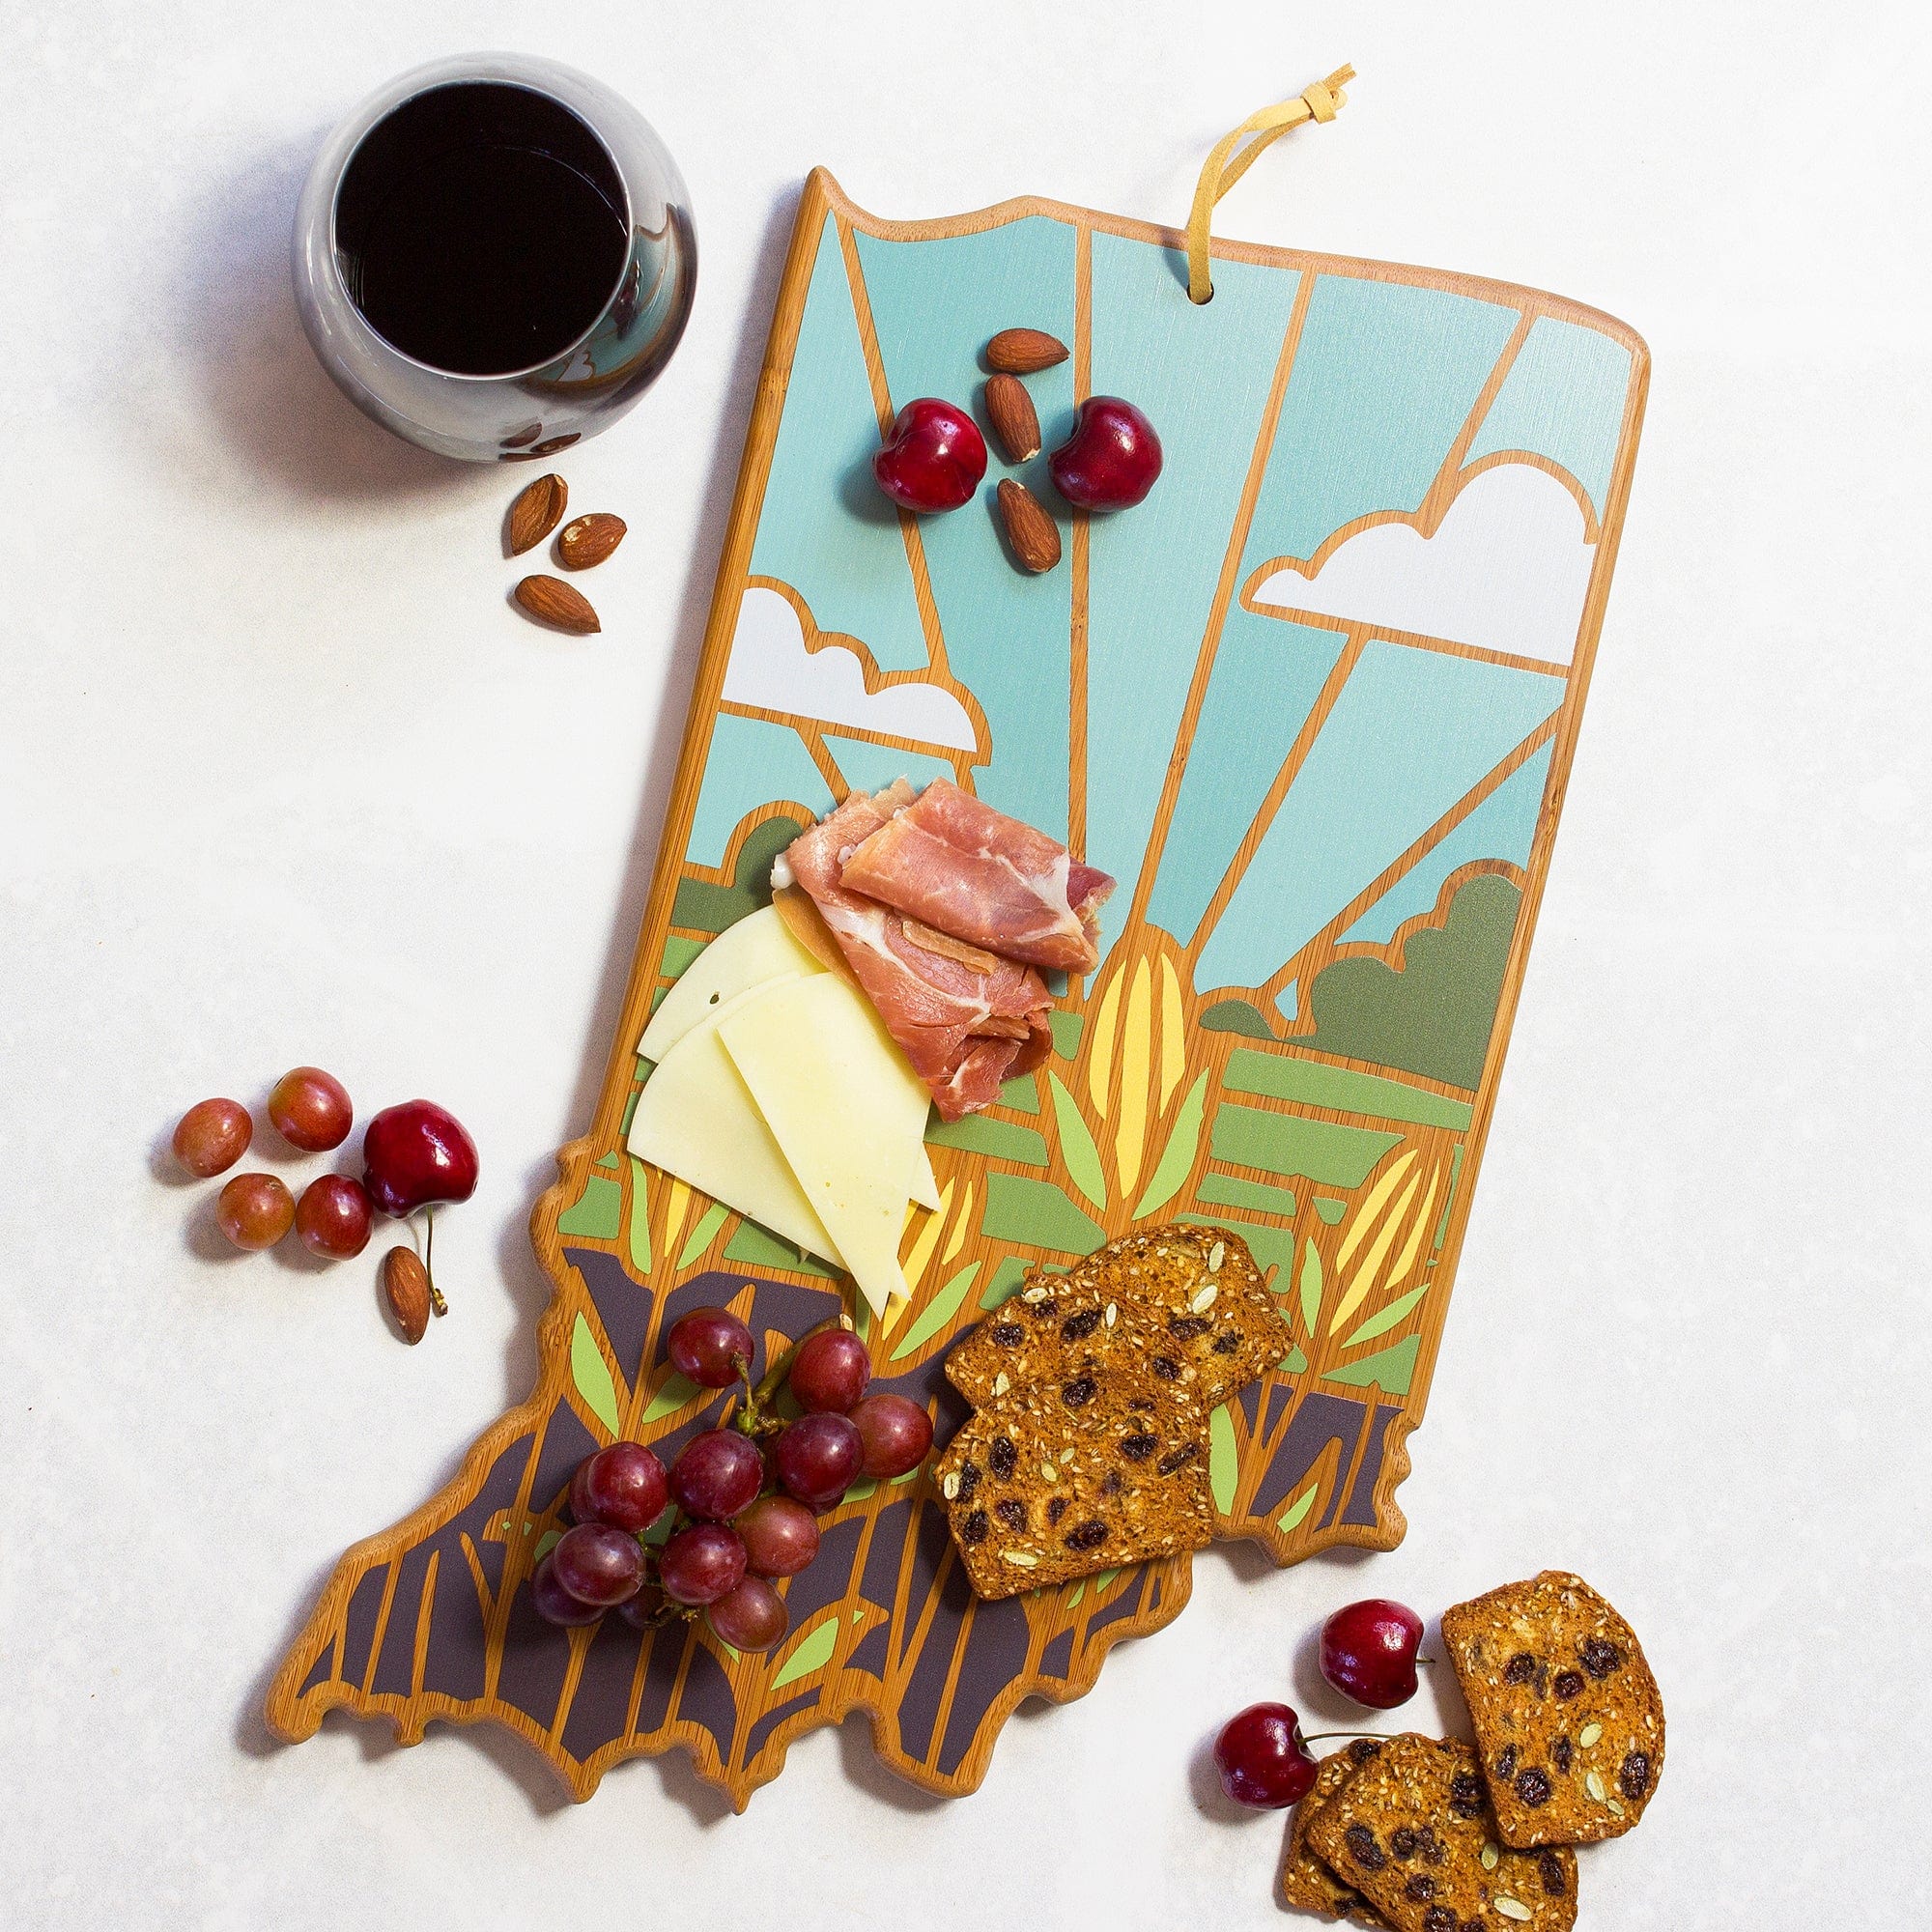 Totally Bamboo Indiana State Shaped Serving and Cutting Board with Artwork by Summer Stokes